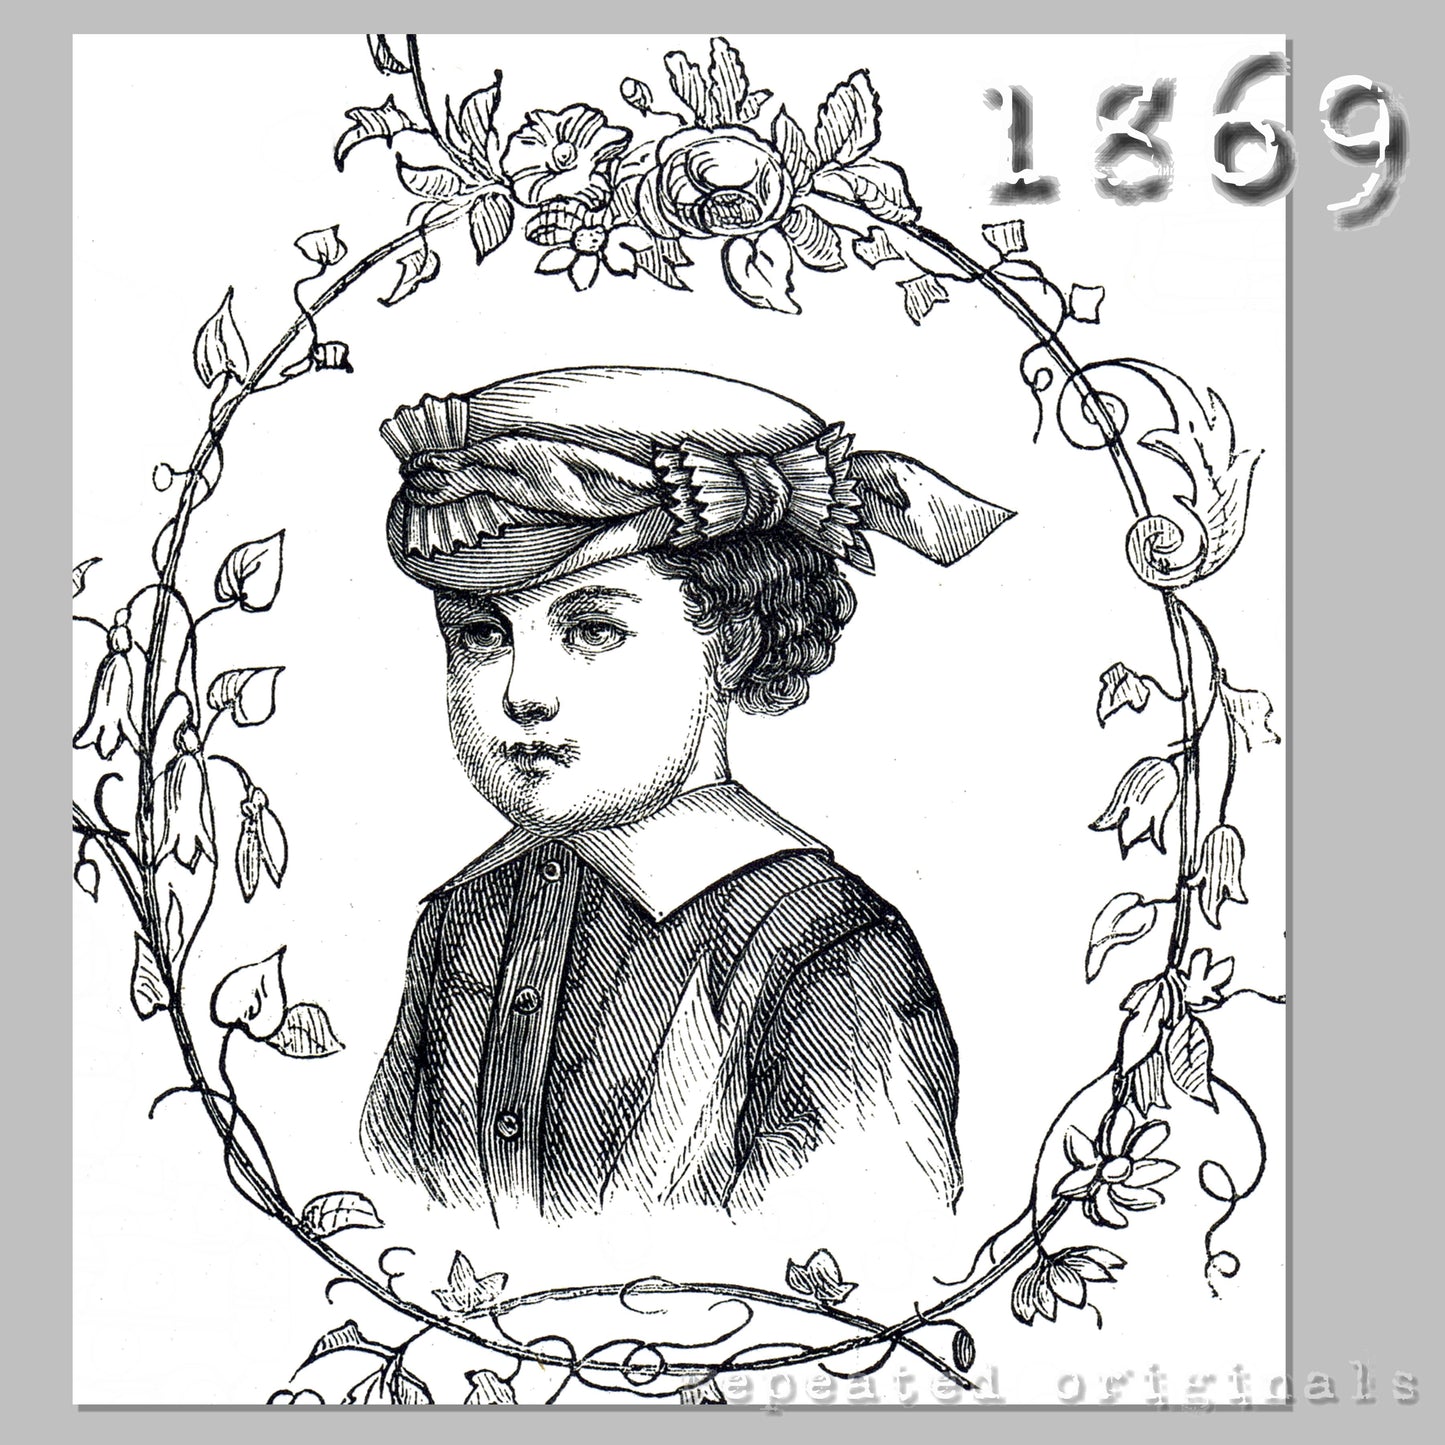 1869 Hats for Children under 2 years Sewing Pattern - INSTANT DOWNLOAD PDF